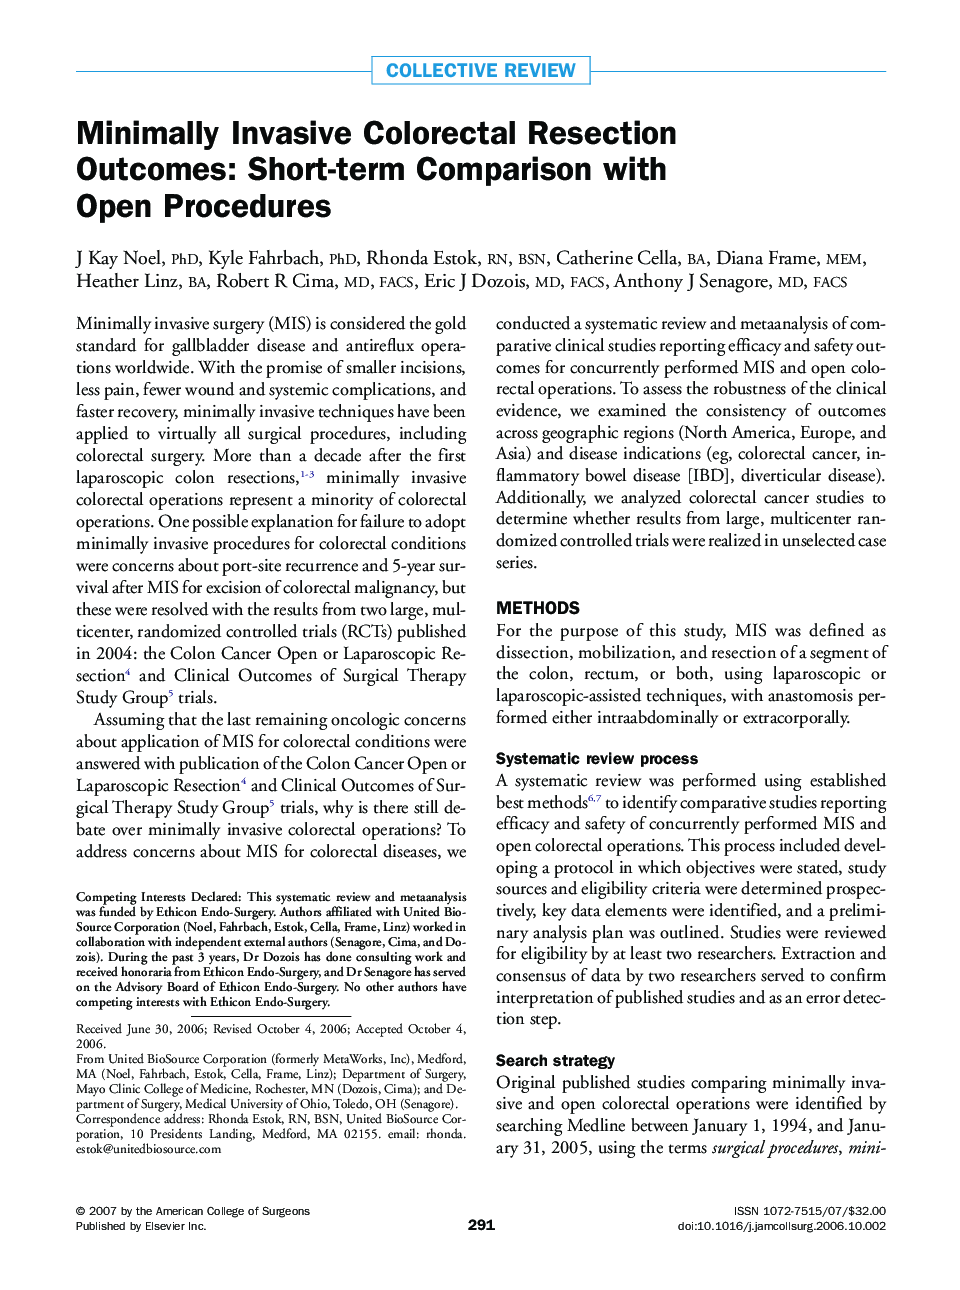 Minimally Invasive Colorectal Resection Outcomes: Short-term Comparison with Open Procedures